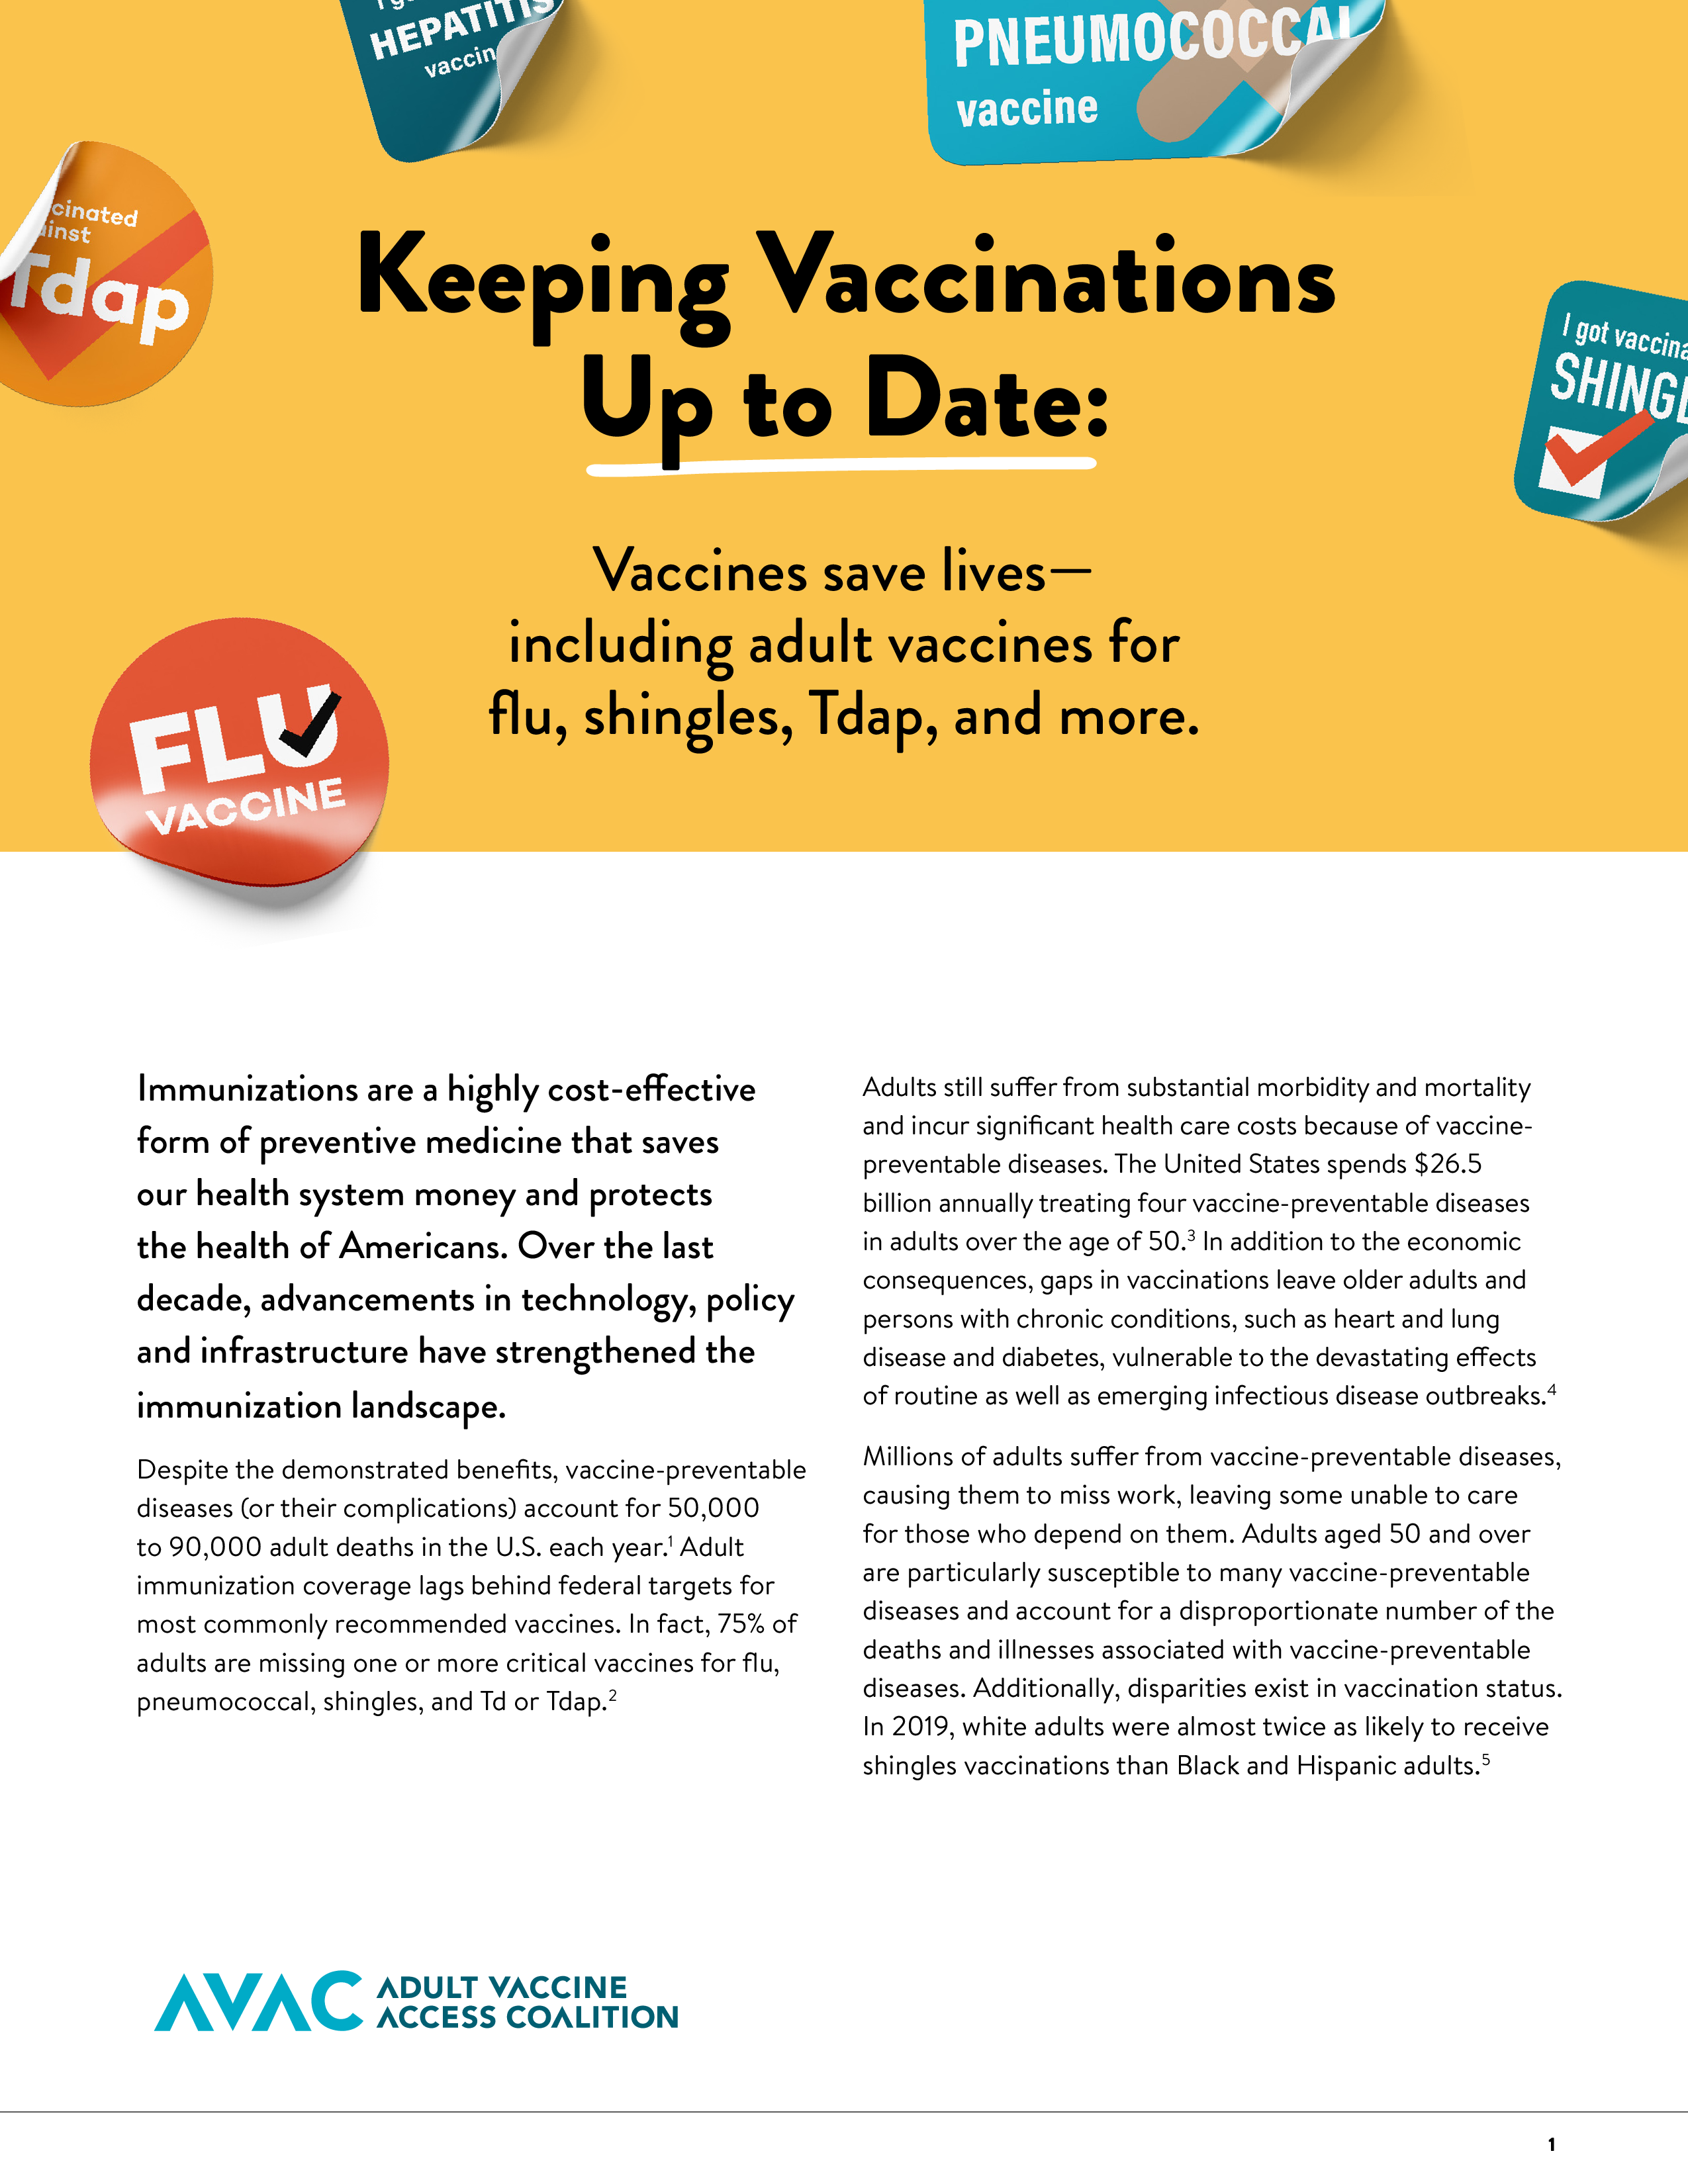 images includes various immunization stickers